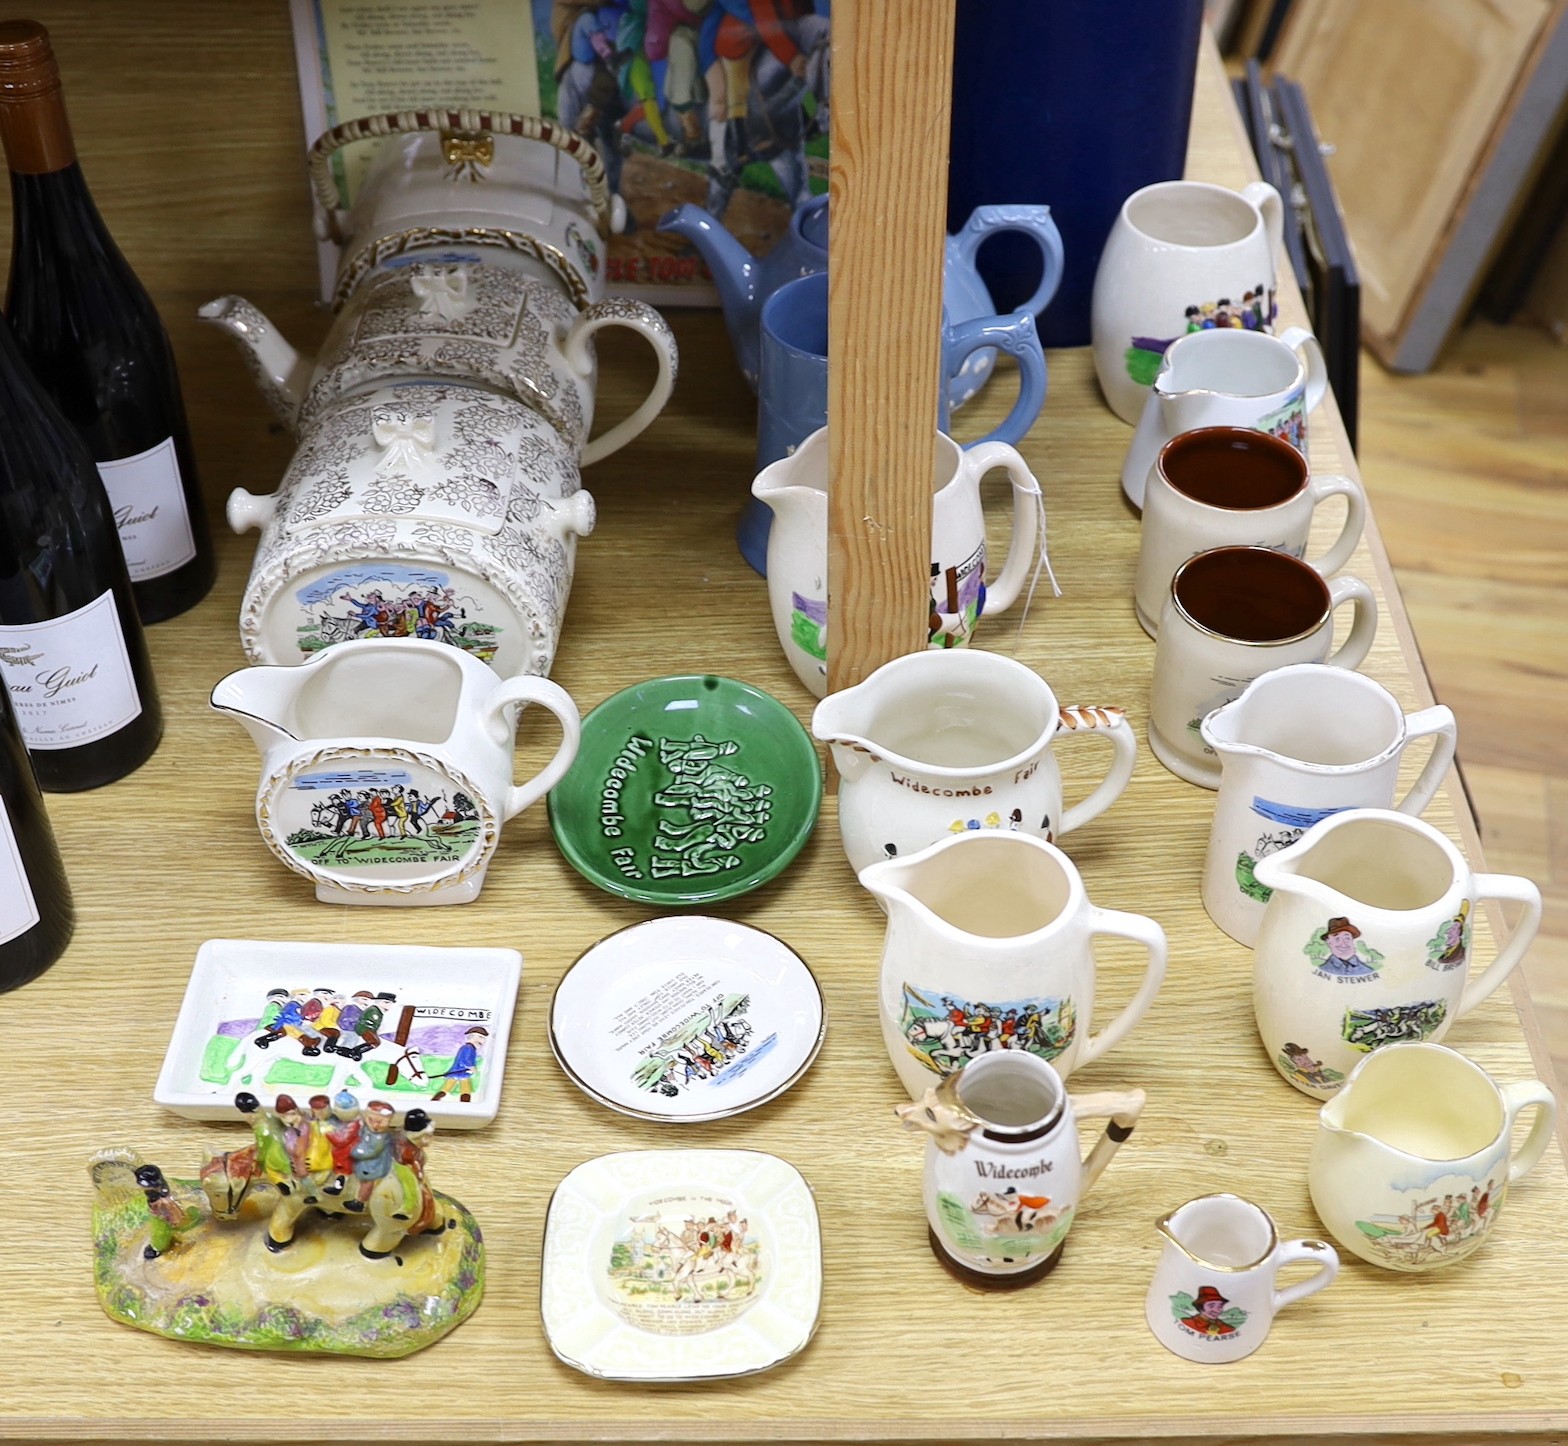 A quantity of novelty items relating to Widecombe Fair, to include jugs, teapots etc.